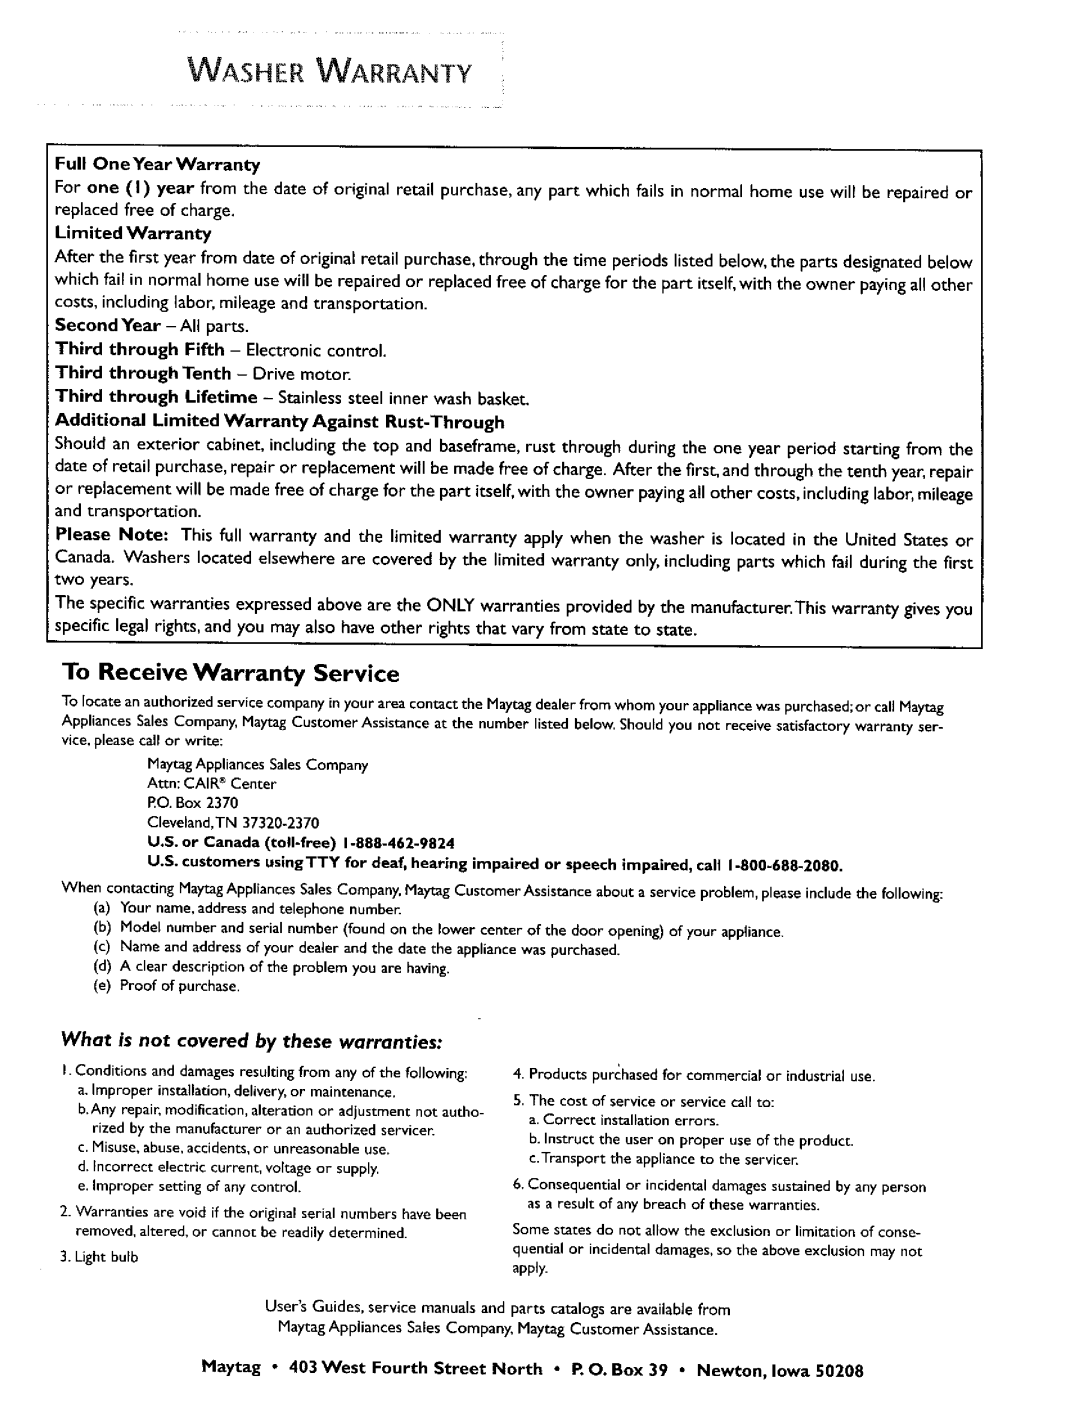 Maytag MAH5500B Washer Warranty, To Receive Warranty Service, What is not covered by these warranties 